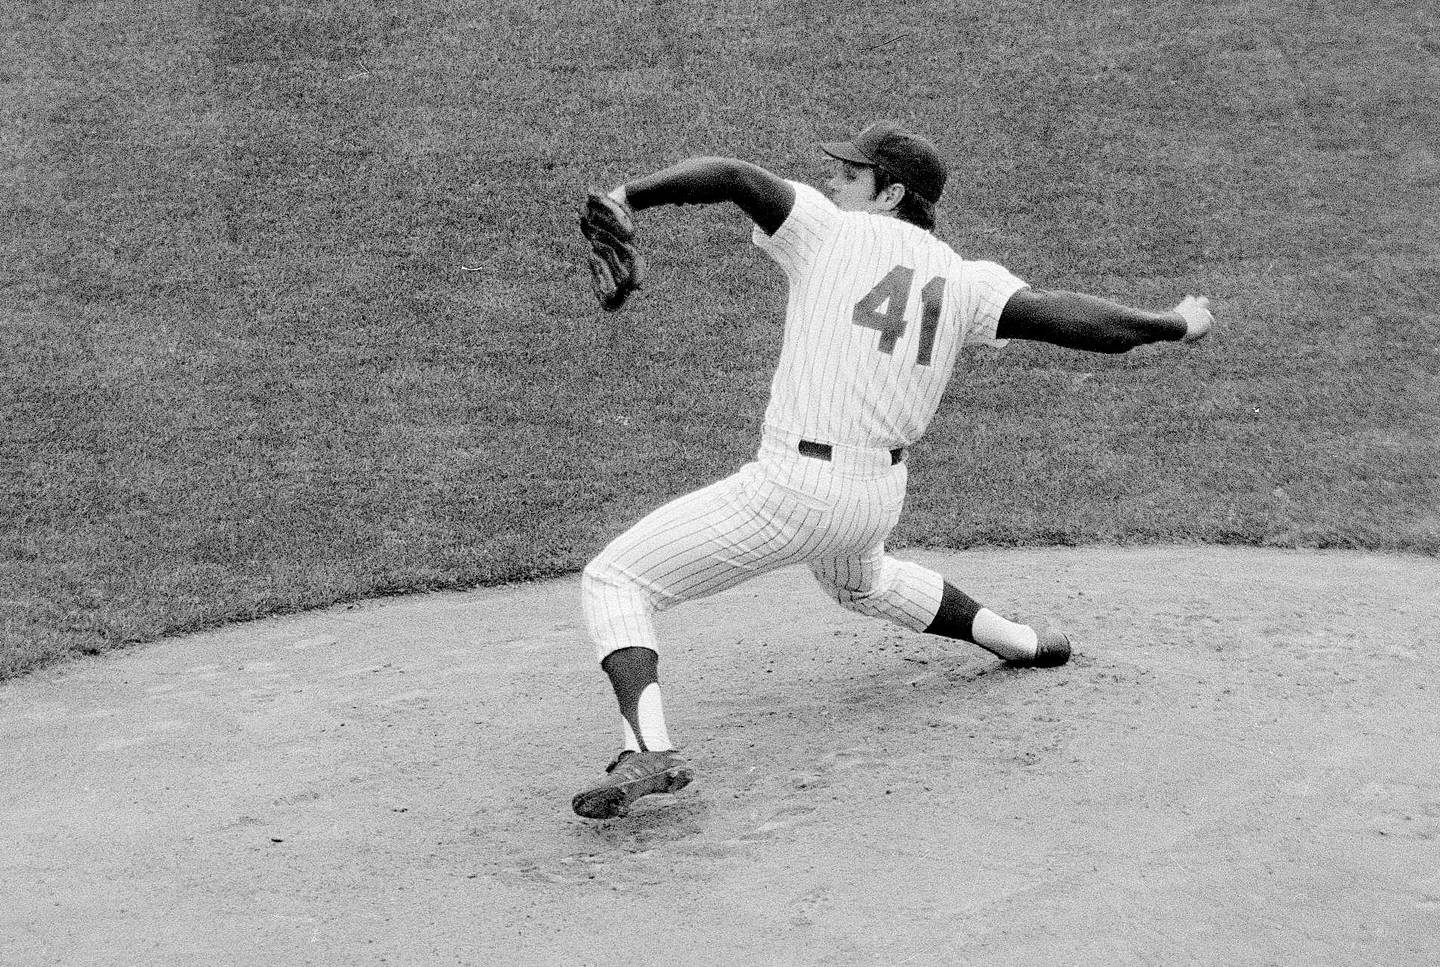 In this April 20, 1967, file photo, New York Mets' Tom Seaver pitches against the Chicago Cubs in a baseball game at Shea Stadium in New York.